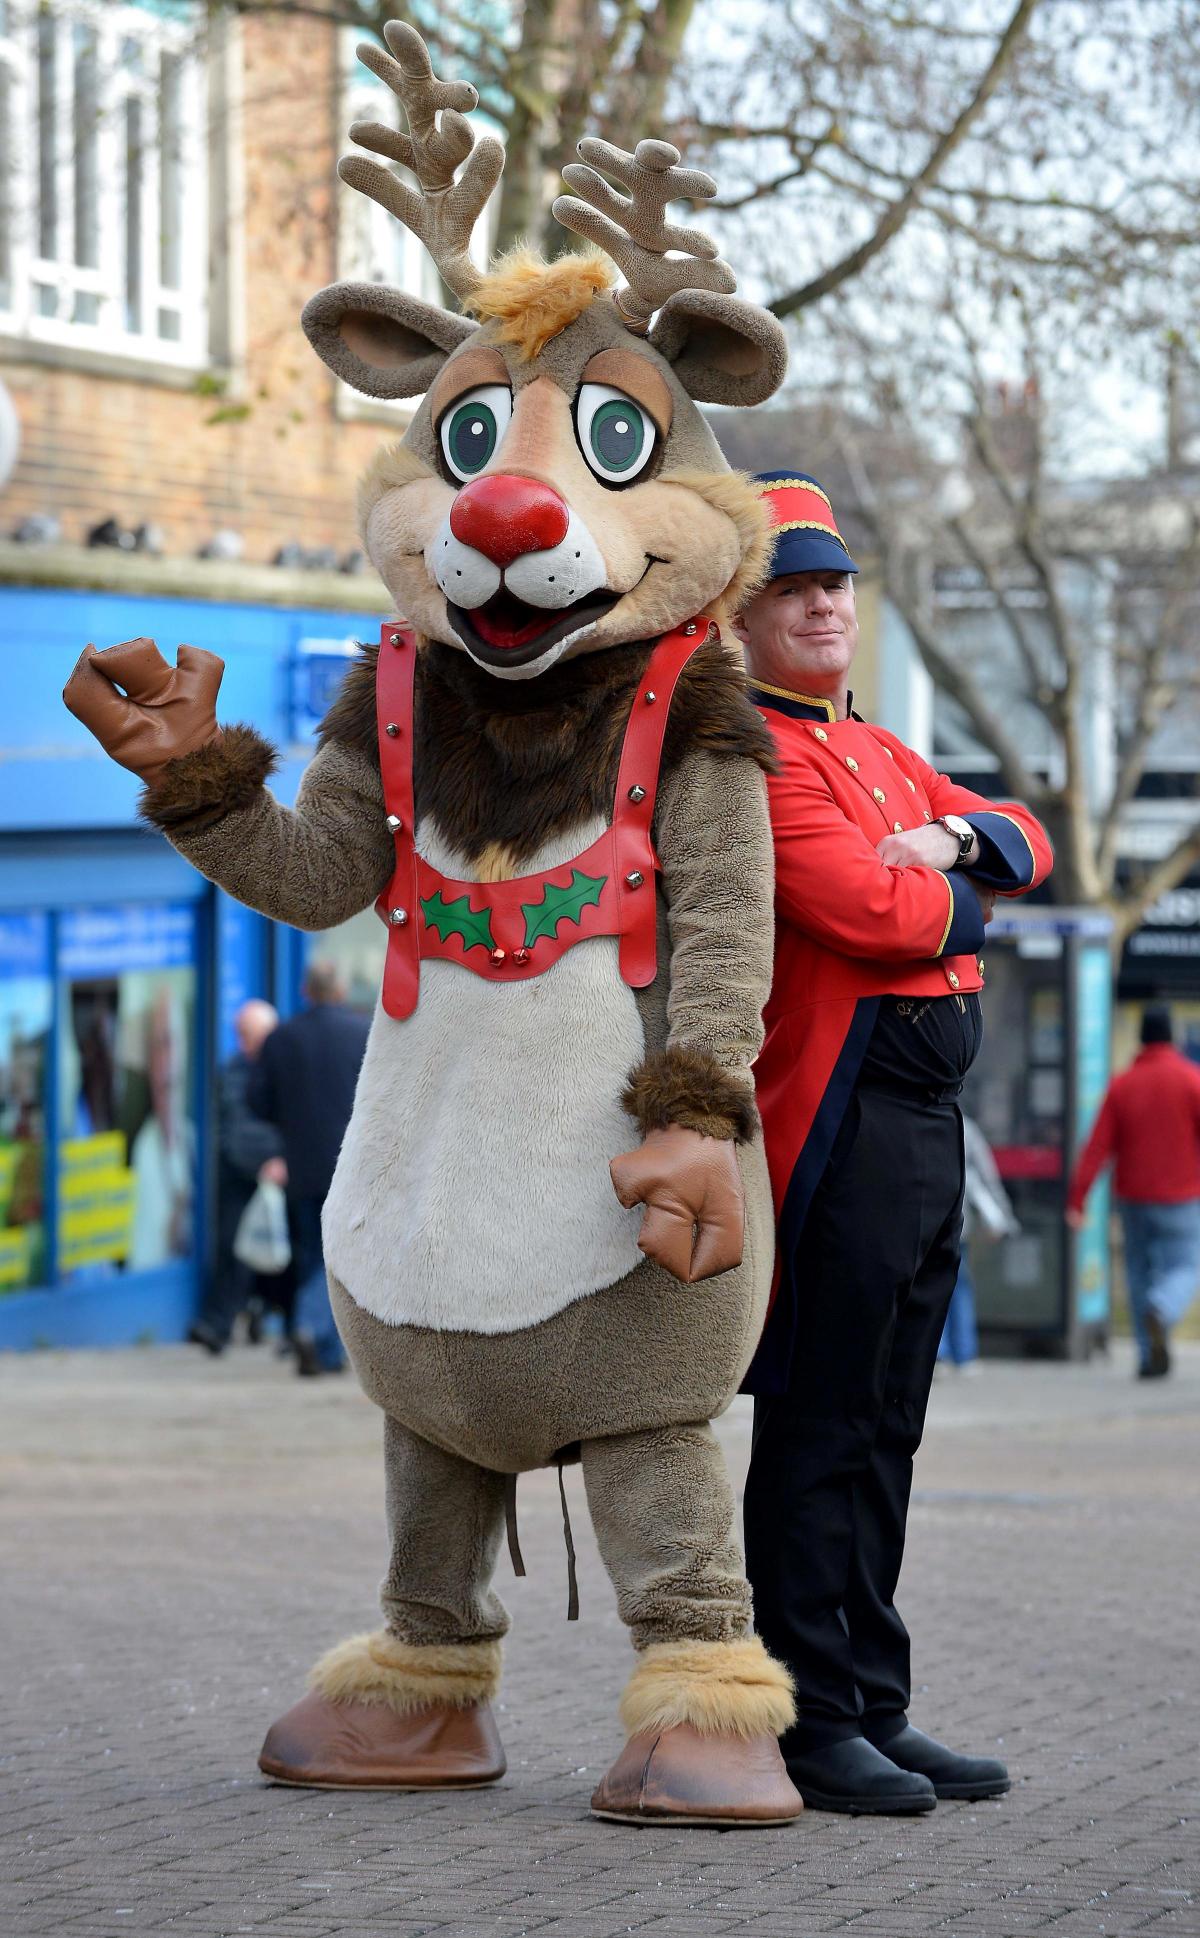 Rudolf and Tim The Toy Soldier help celebrate Christmas in Shipley